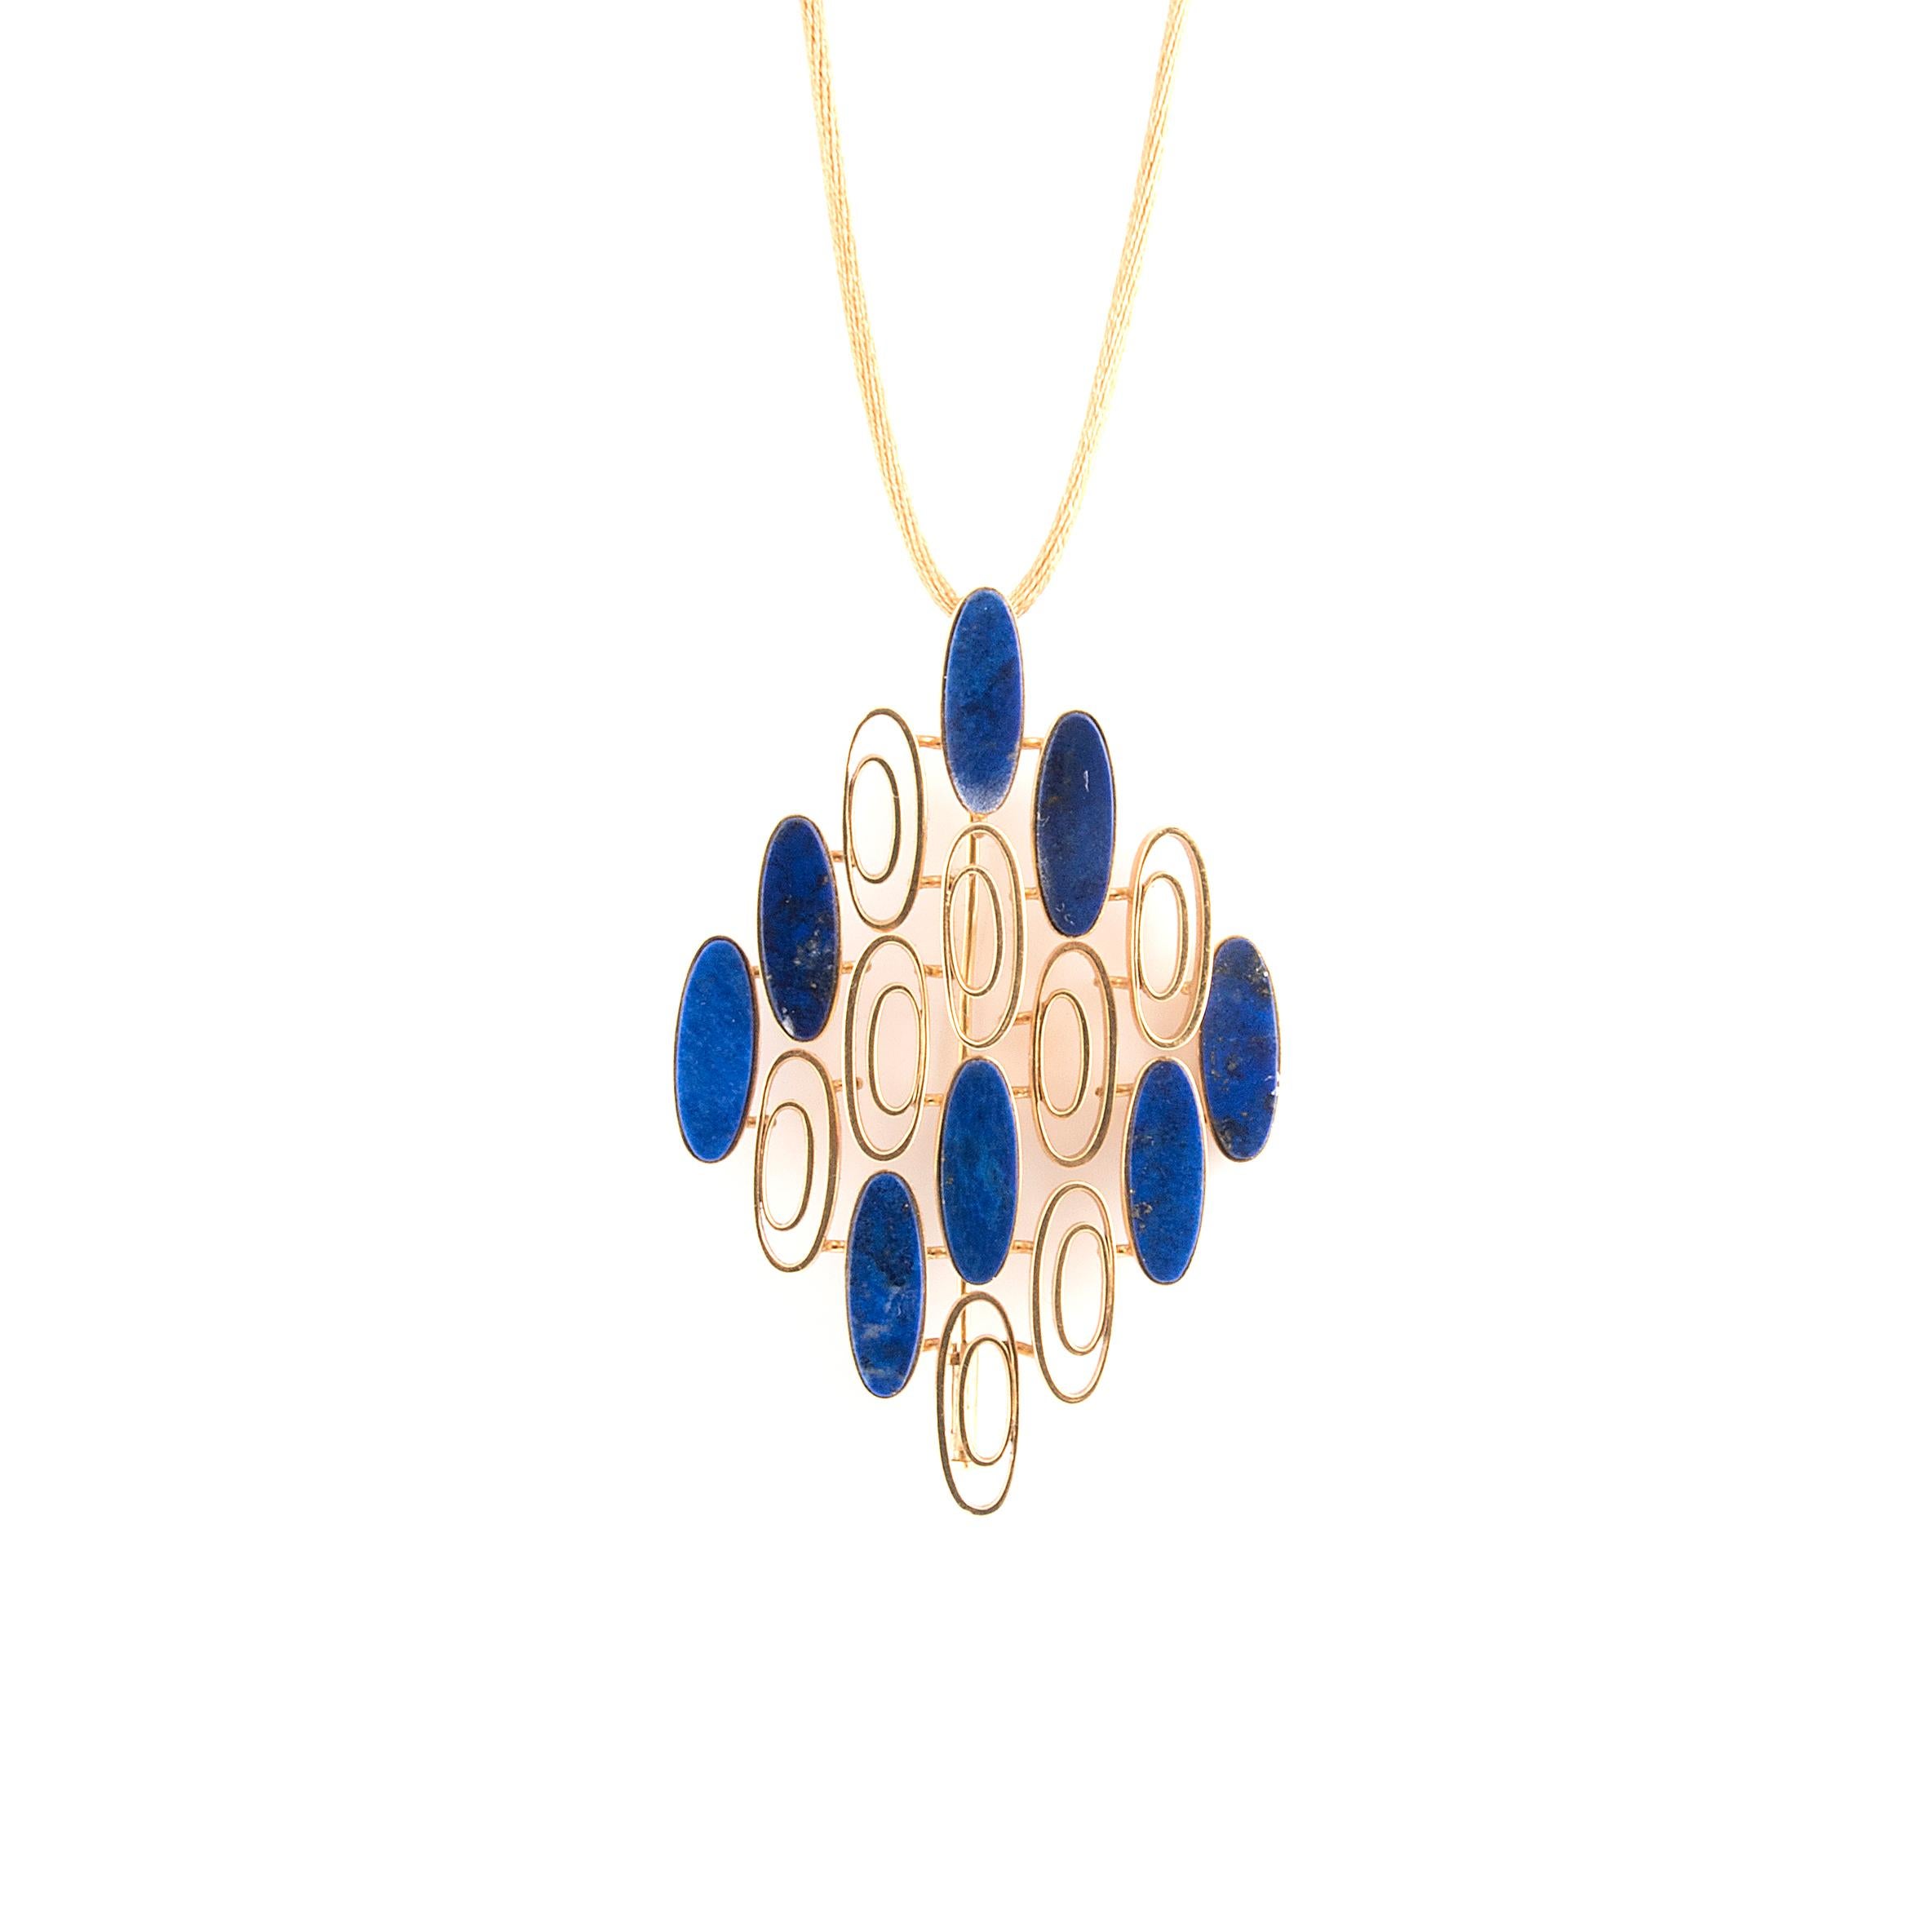 A stylish Italian seventies pendant that can also be worn as a pin brooch, with oval 18k gold rings and oval lapis Lazuli plaques arranged on different levels in a lozenge shape. 
Stamped 750, 18k and with a french import mark
Italy, 1970s
